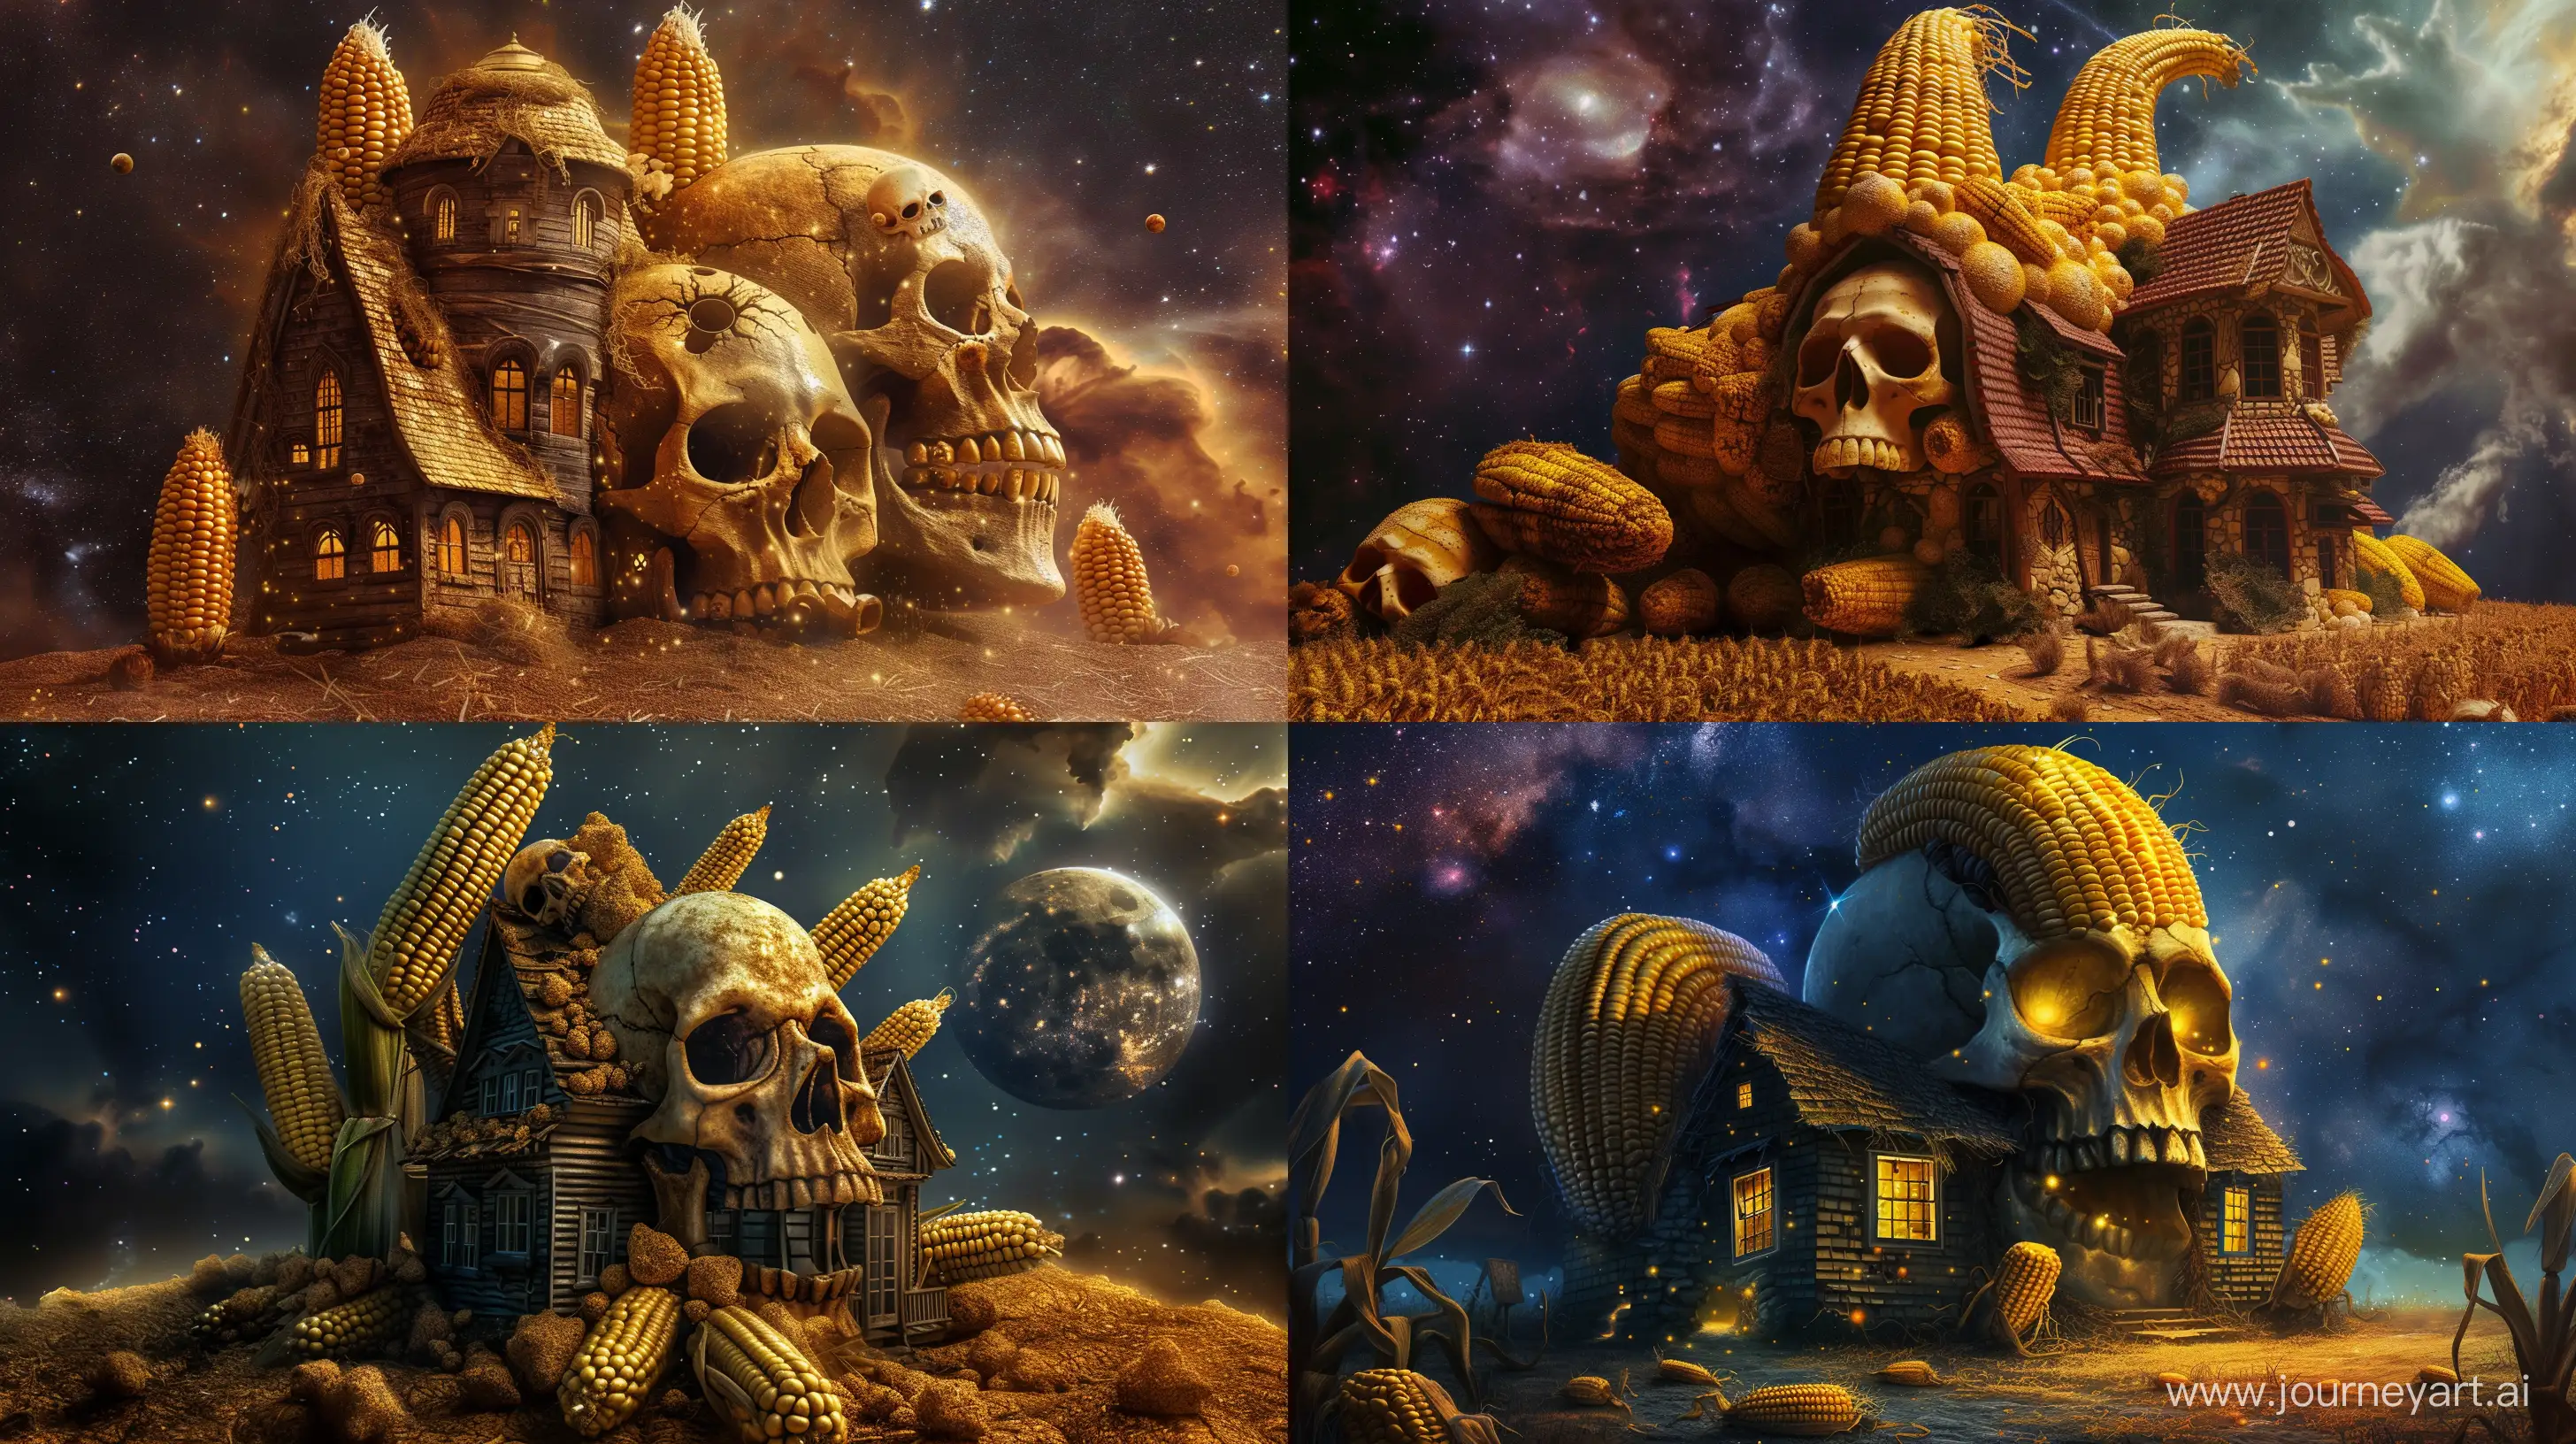 Fantasy-Corn-and-Skull-House-in-Galactic-Setting